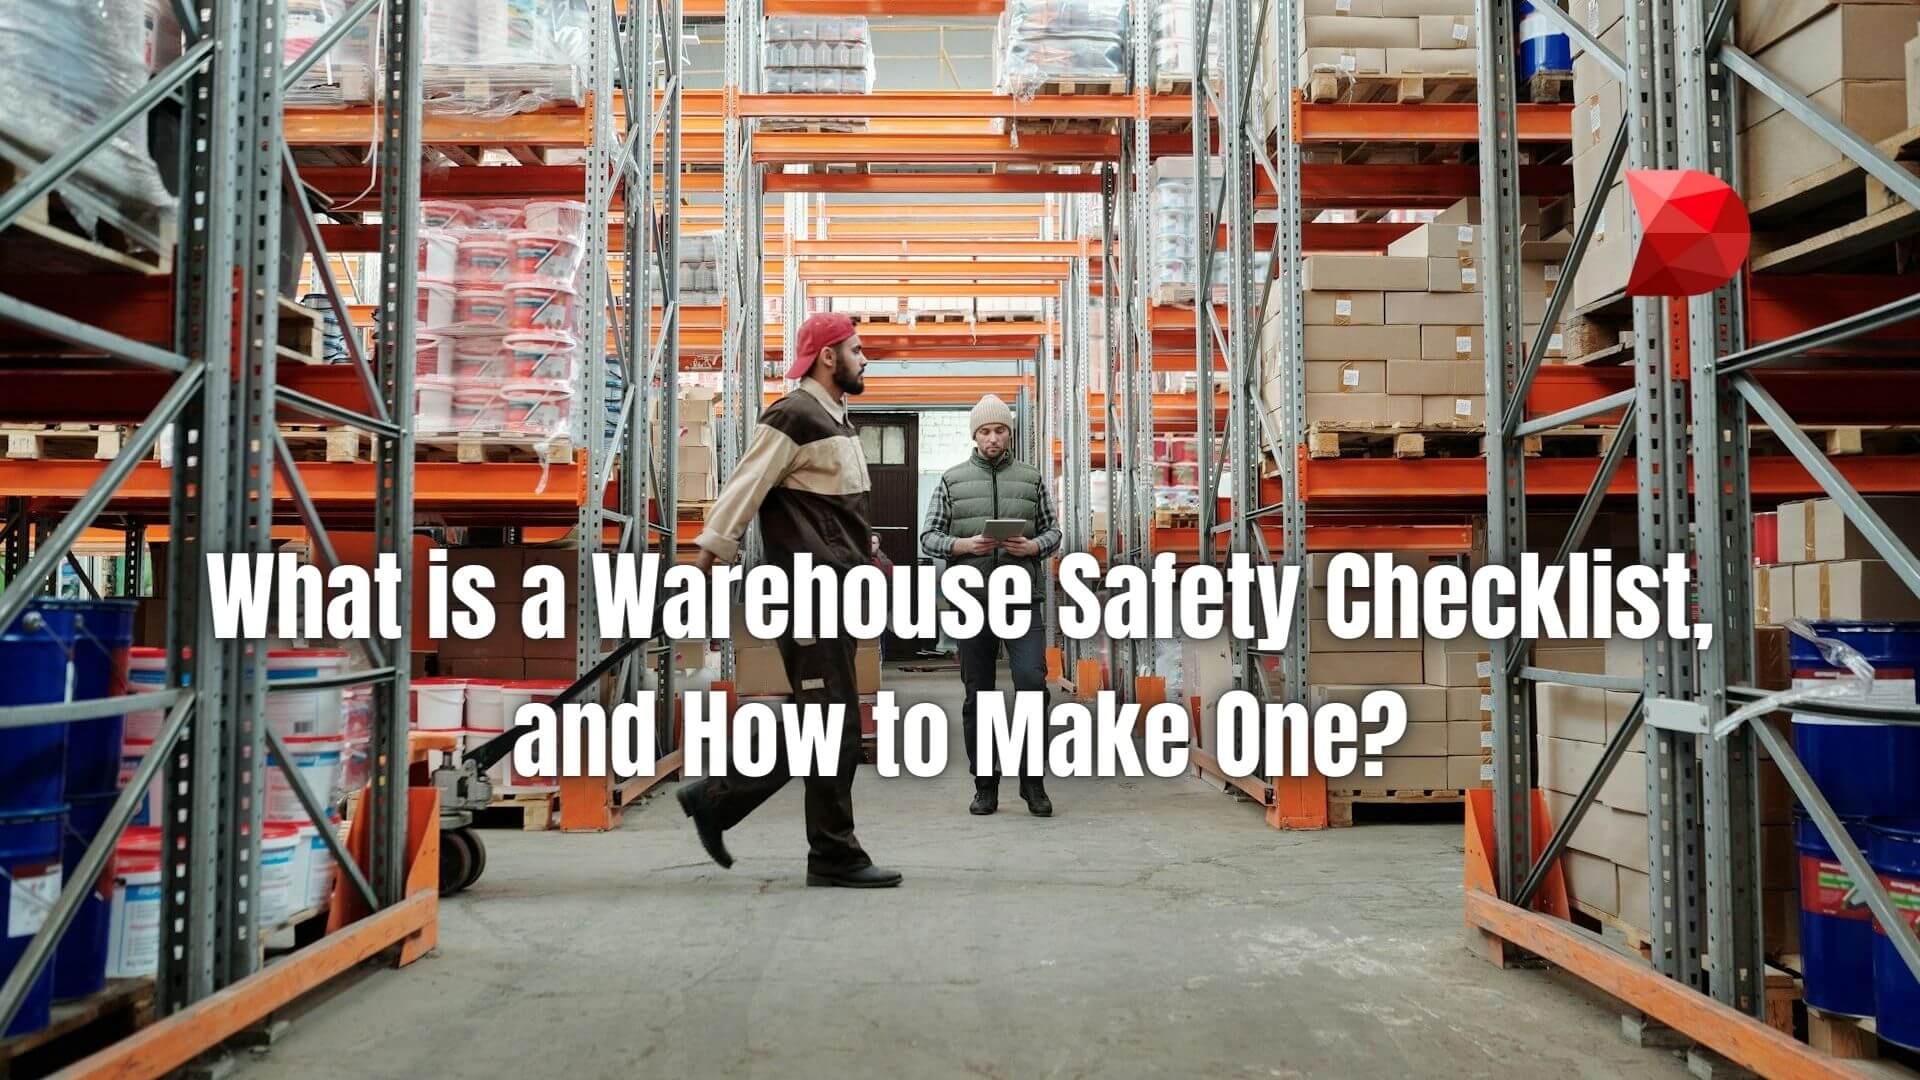 Stay ahead of safety regulations with our comprehensive guide. Click here to learn how to build a tailored warehouse safety checklist.